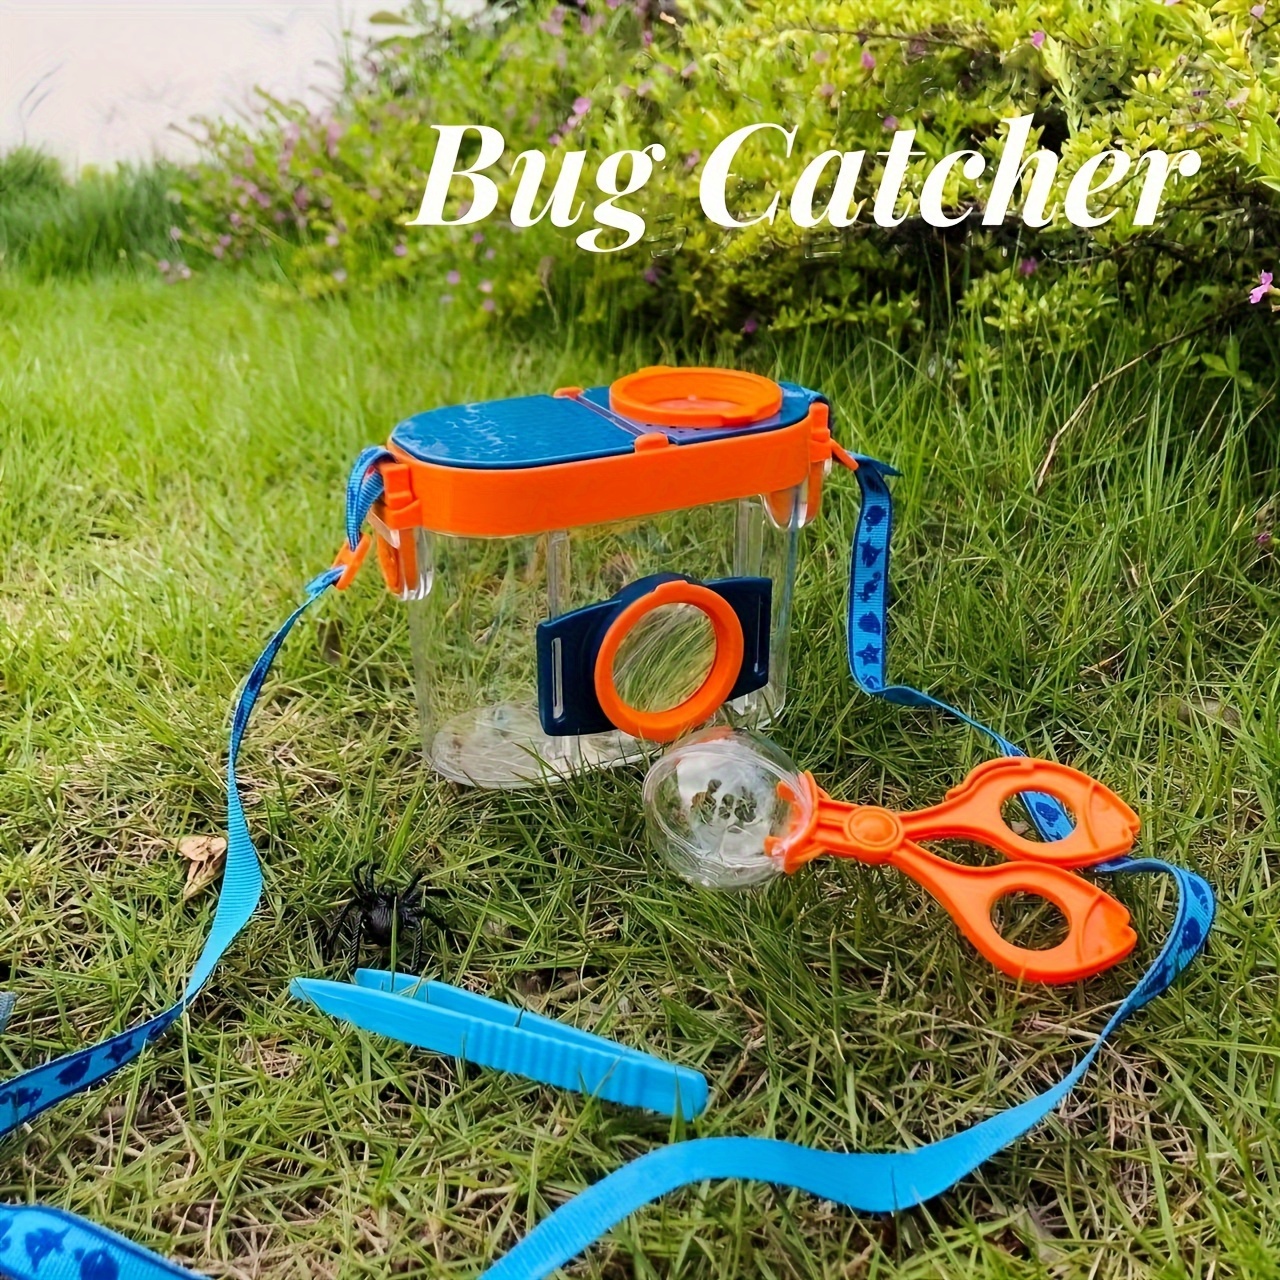 Catching Toy Set Educational Kids Insect Catching Toy Set Bugs Catching Set  With Butterfly Net Keeper Magnifying Glass